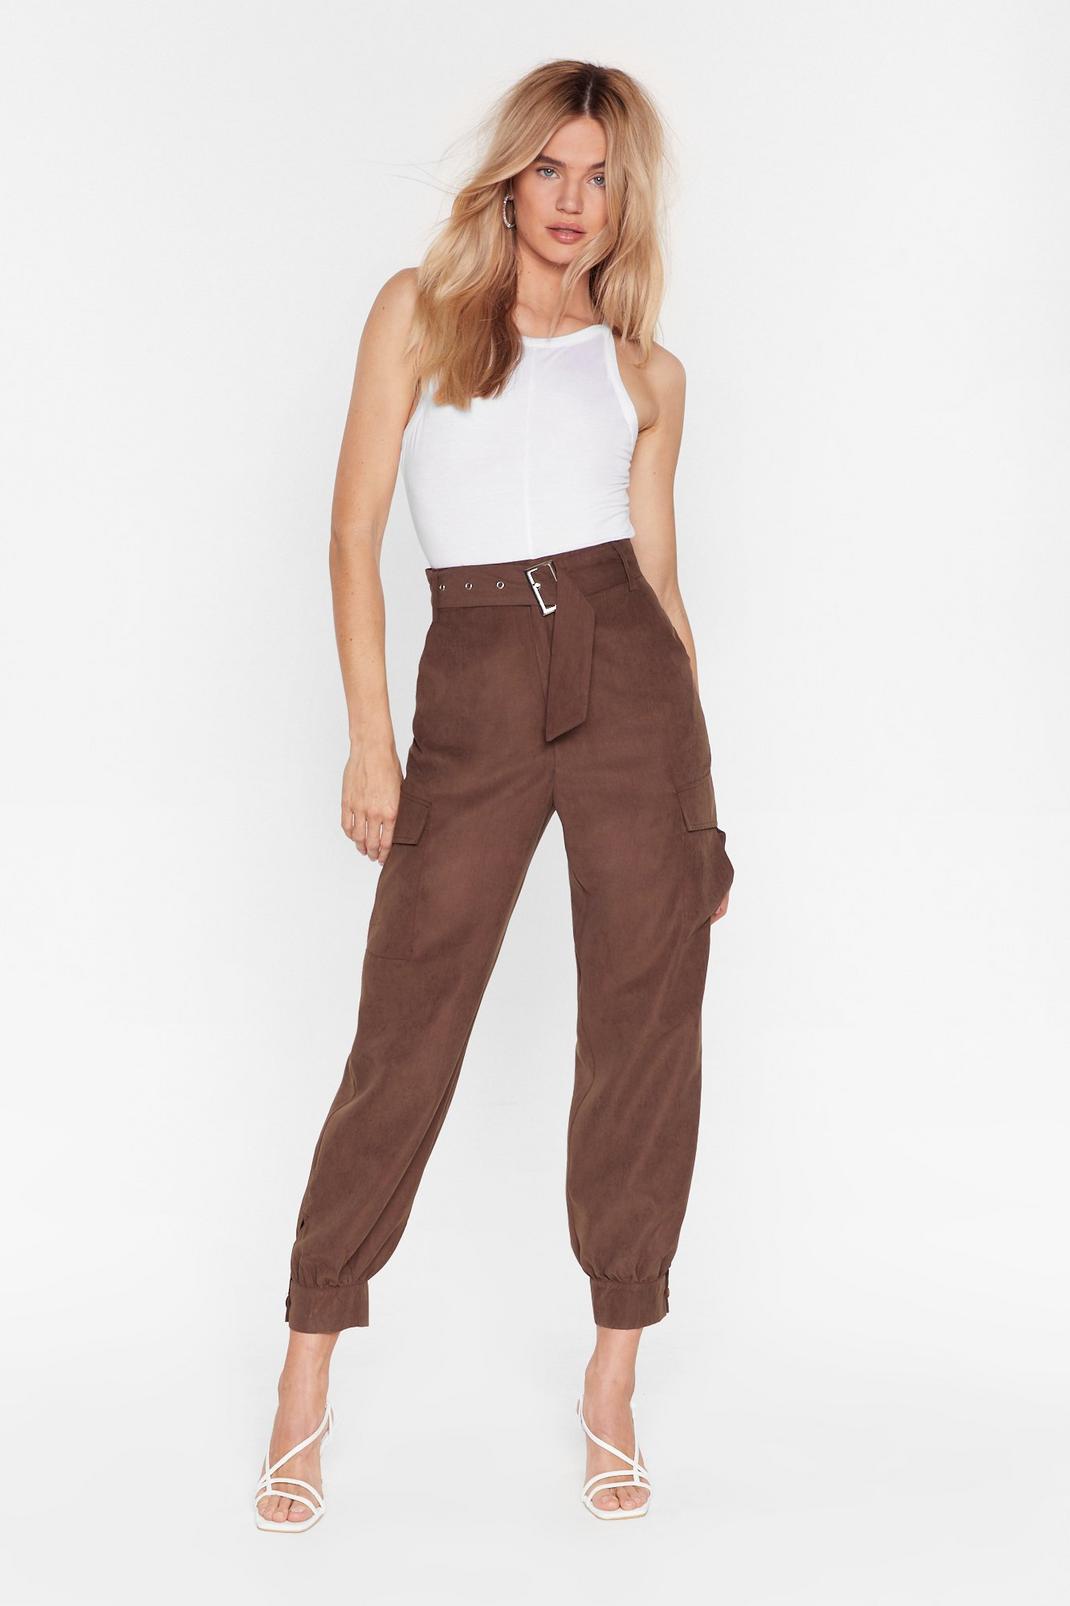 Never Belt This Way High-Waisted Cargo Pants image number 1